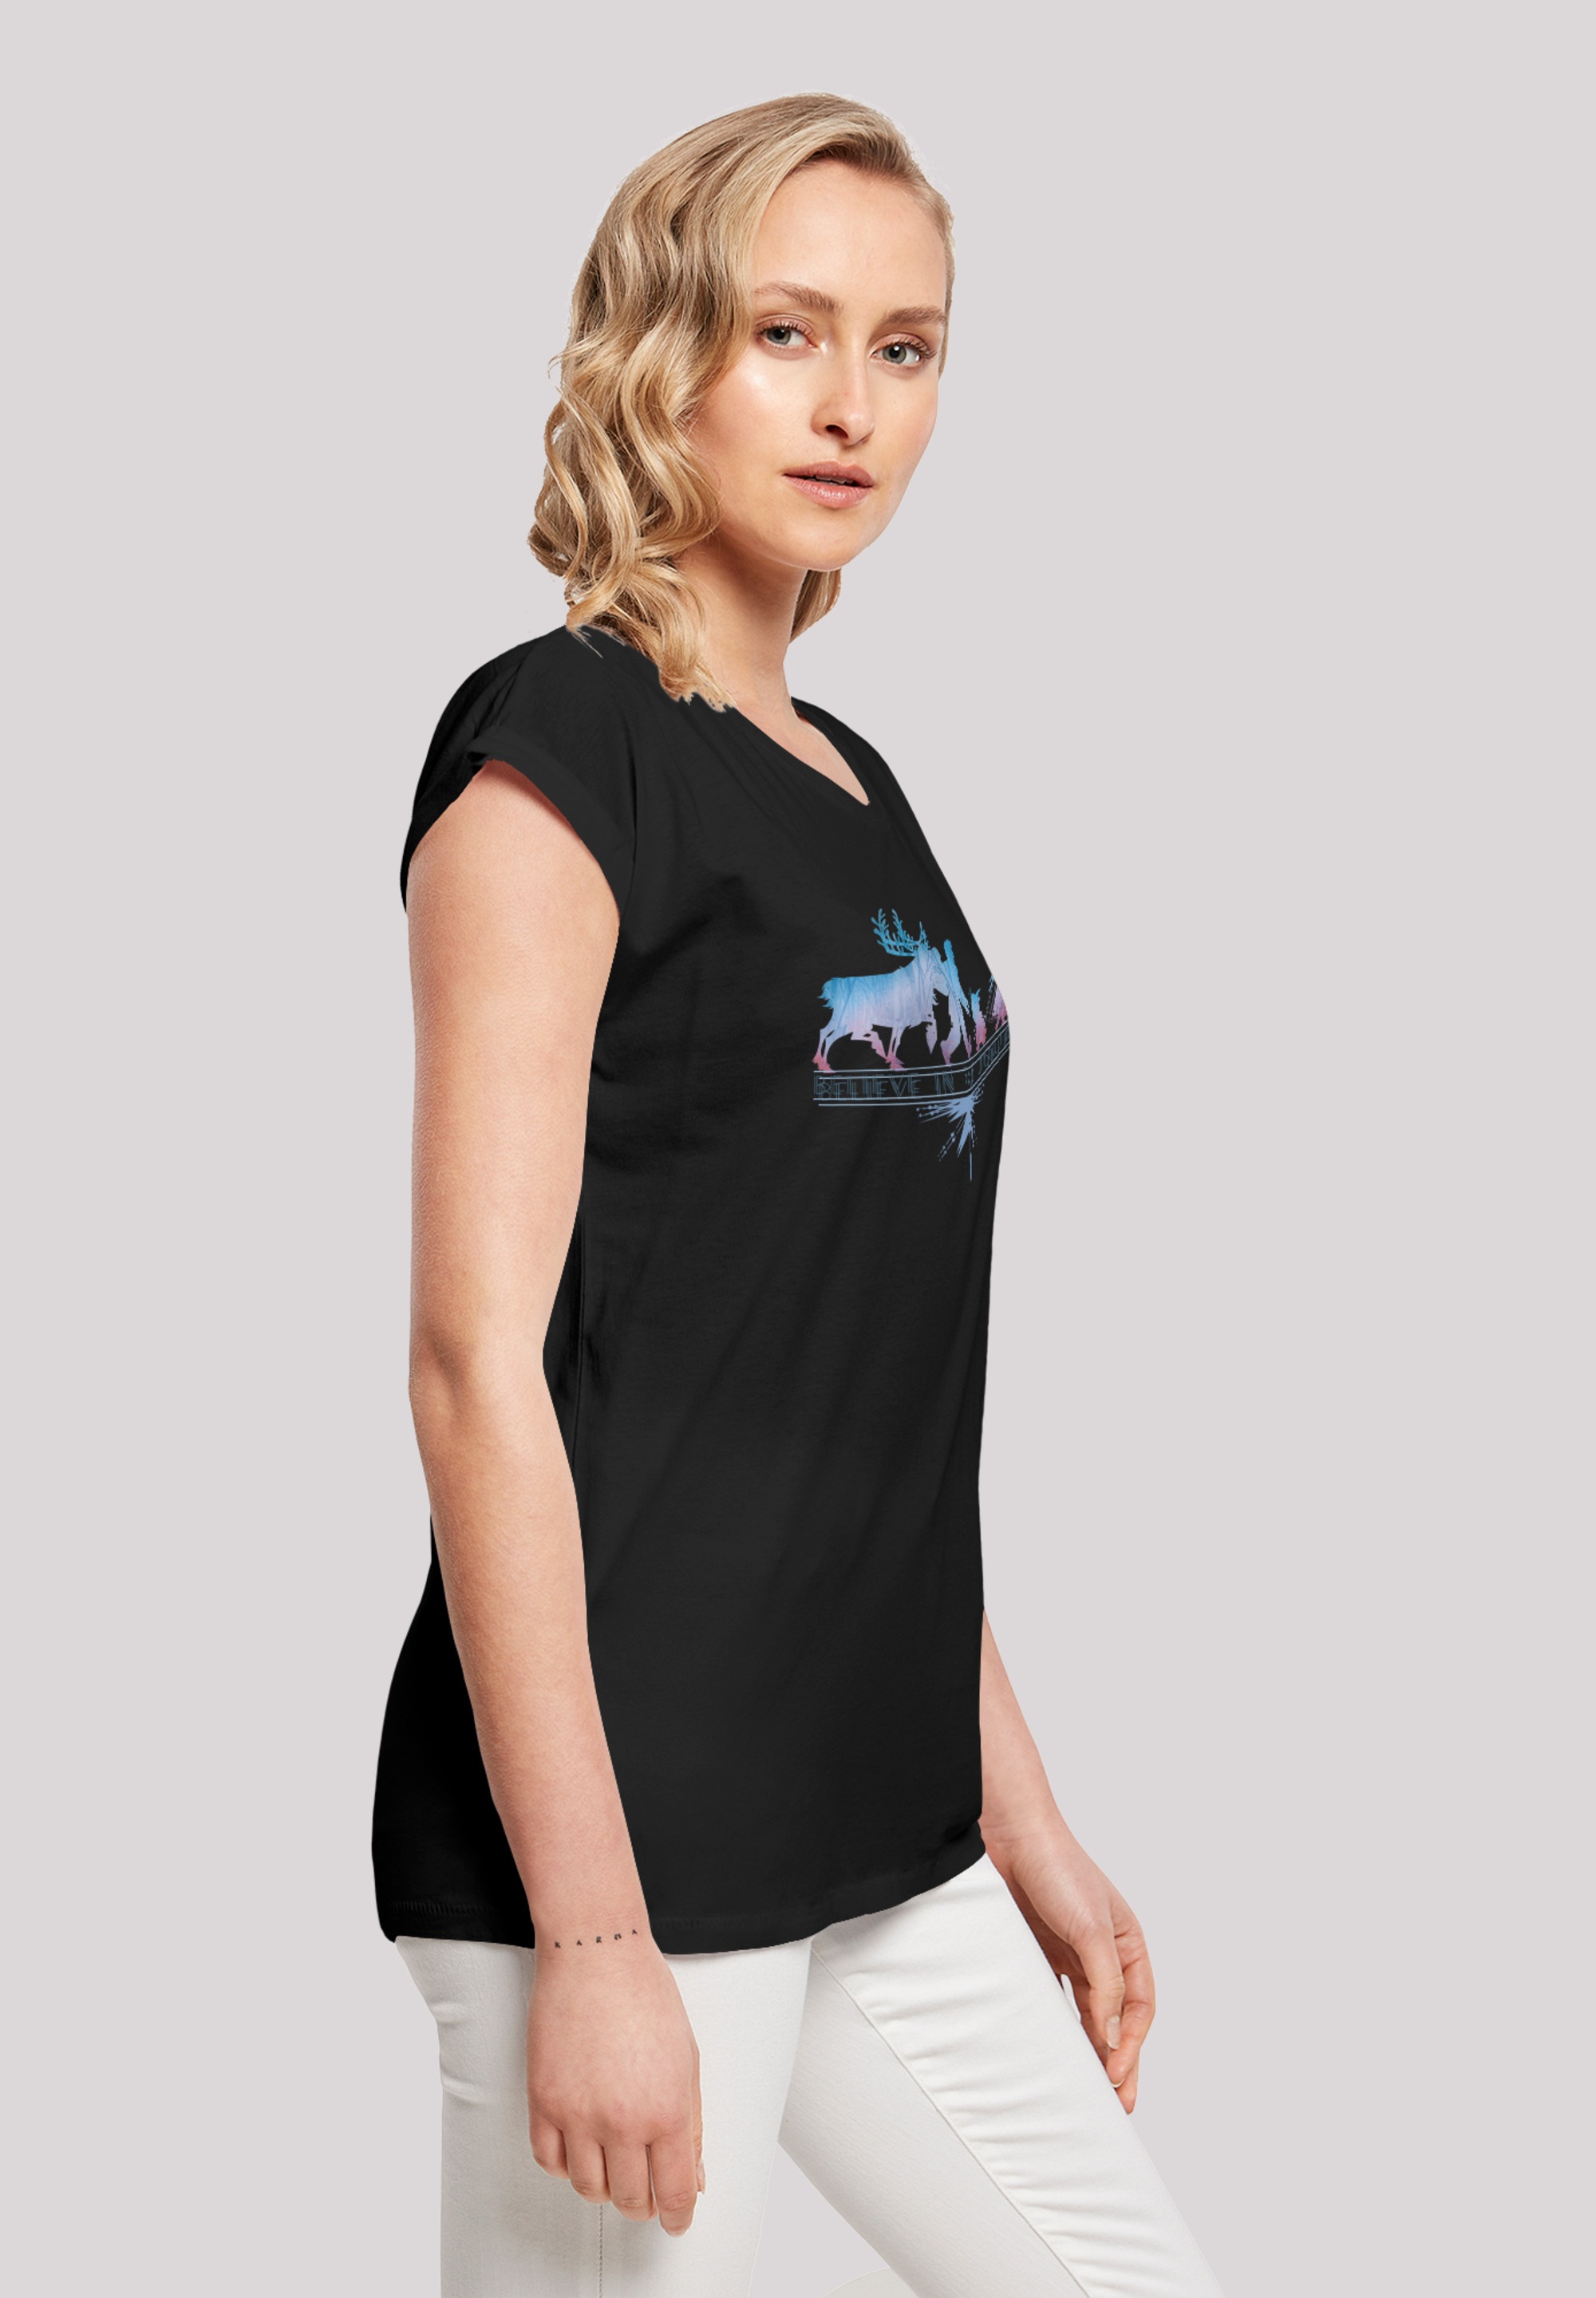 Black Friday F4NT4STIC T-Shirt »Frozen 2 Believe In The Journey\'«, Print |  BAUR